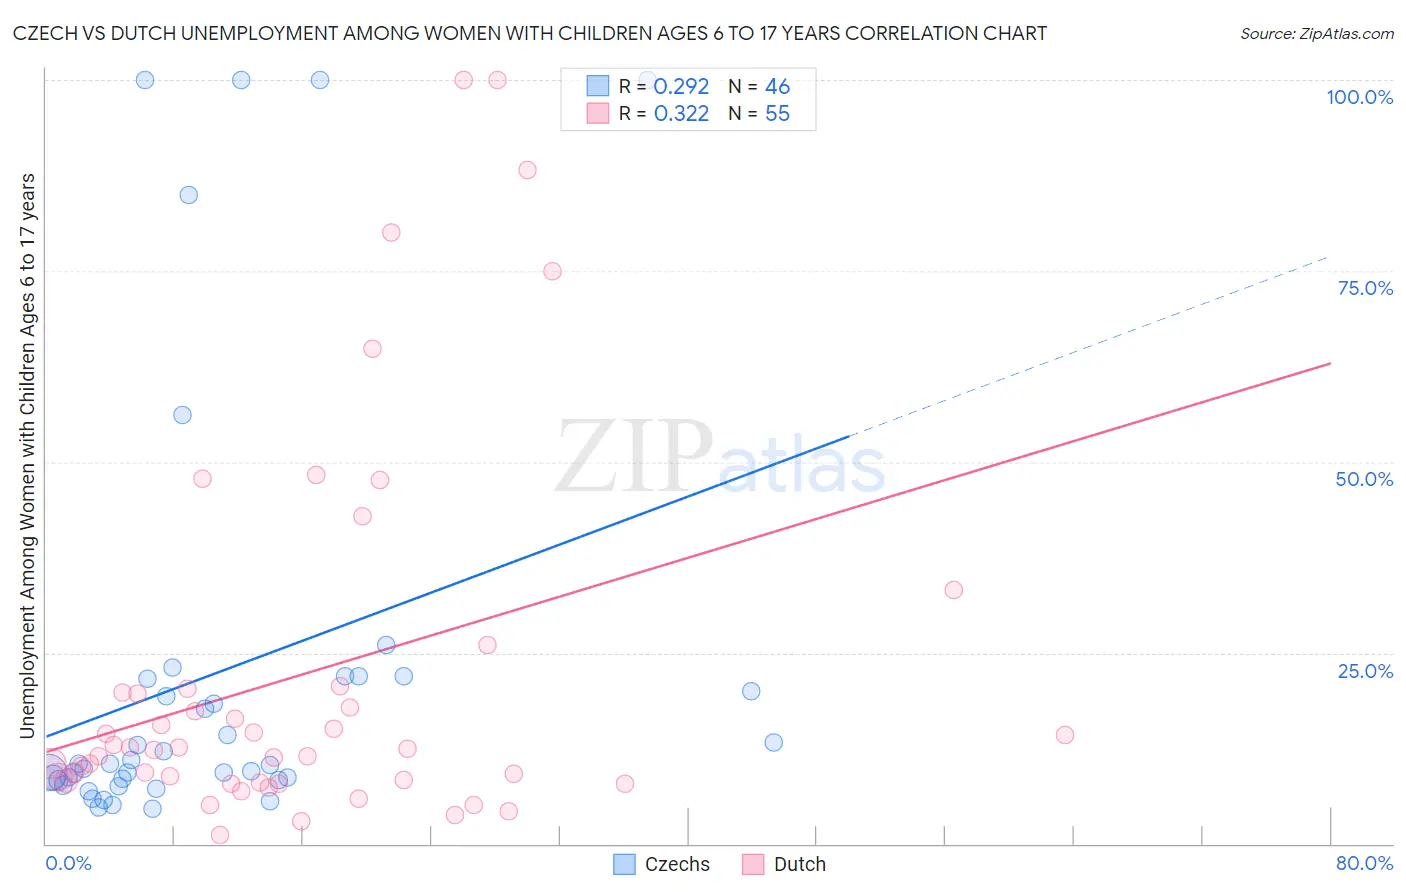 Czech vs Dutch Unemployment Among Women with Children Ages 6 to 17 years